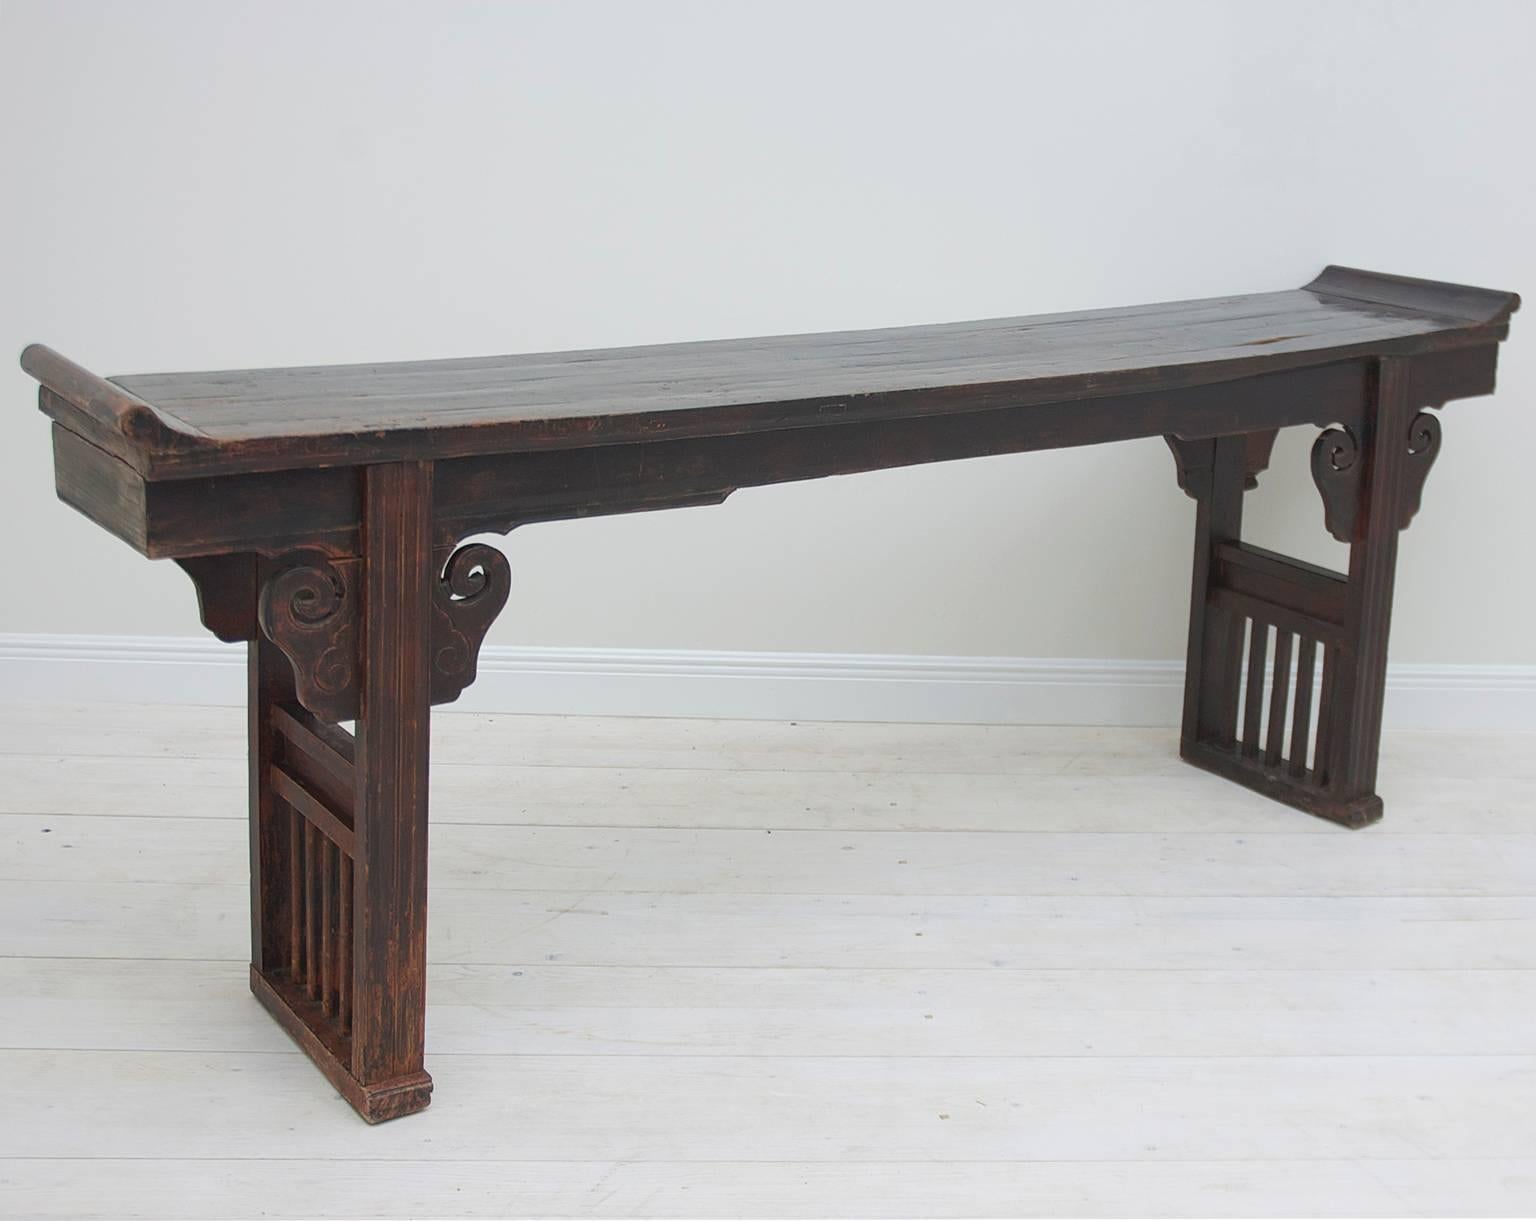 A long altar table in elm wood with recessed top, with inverted ends, on box trestle base with carved cloud forms on spandrels. Has traditional unmitered bridle-joint construction. Jiangsu Province, China, circa early 1800s. 

Measures: 97"